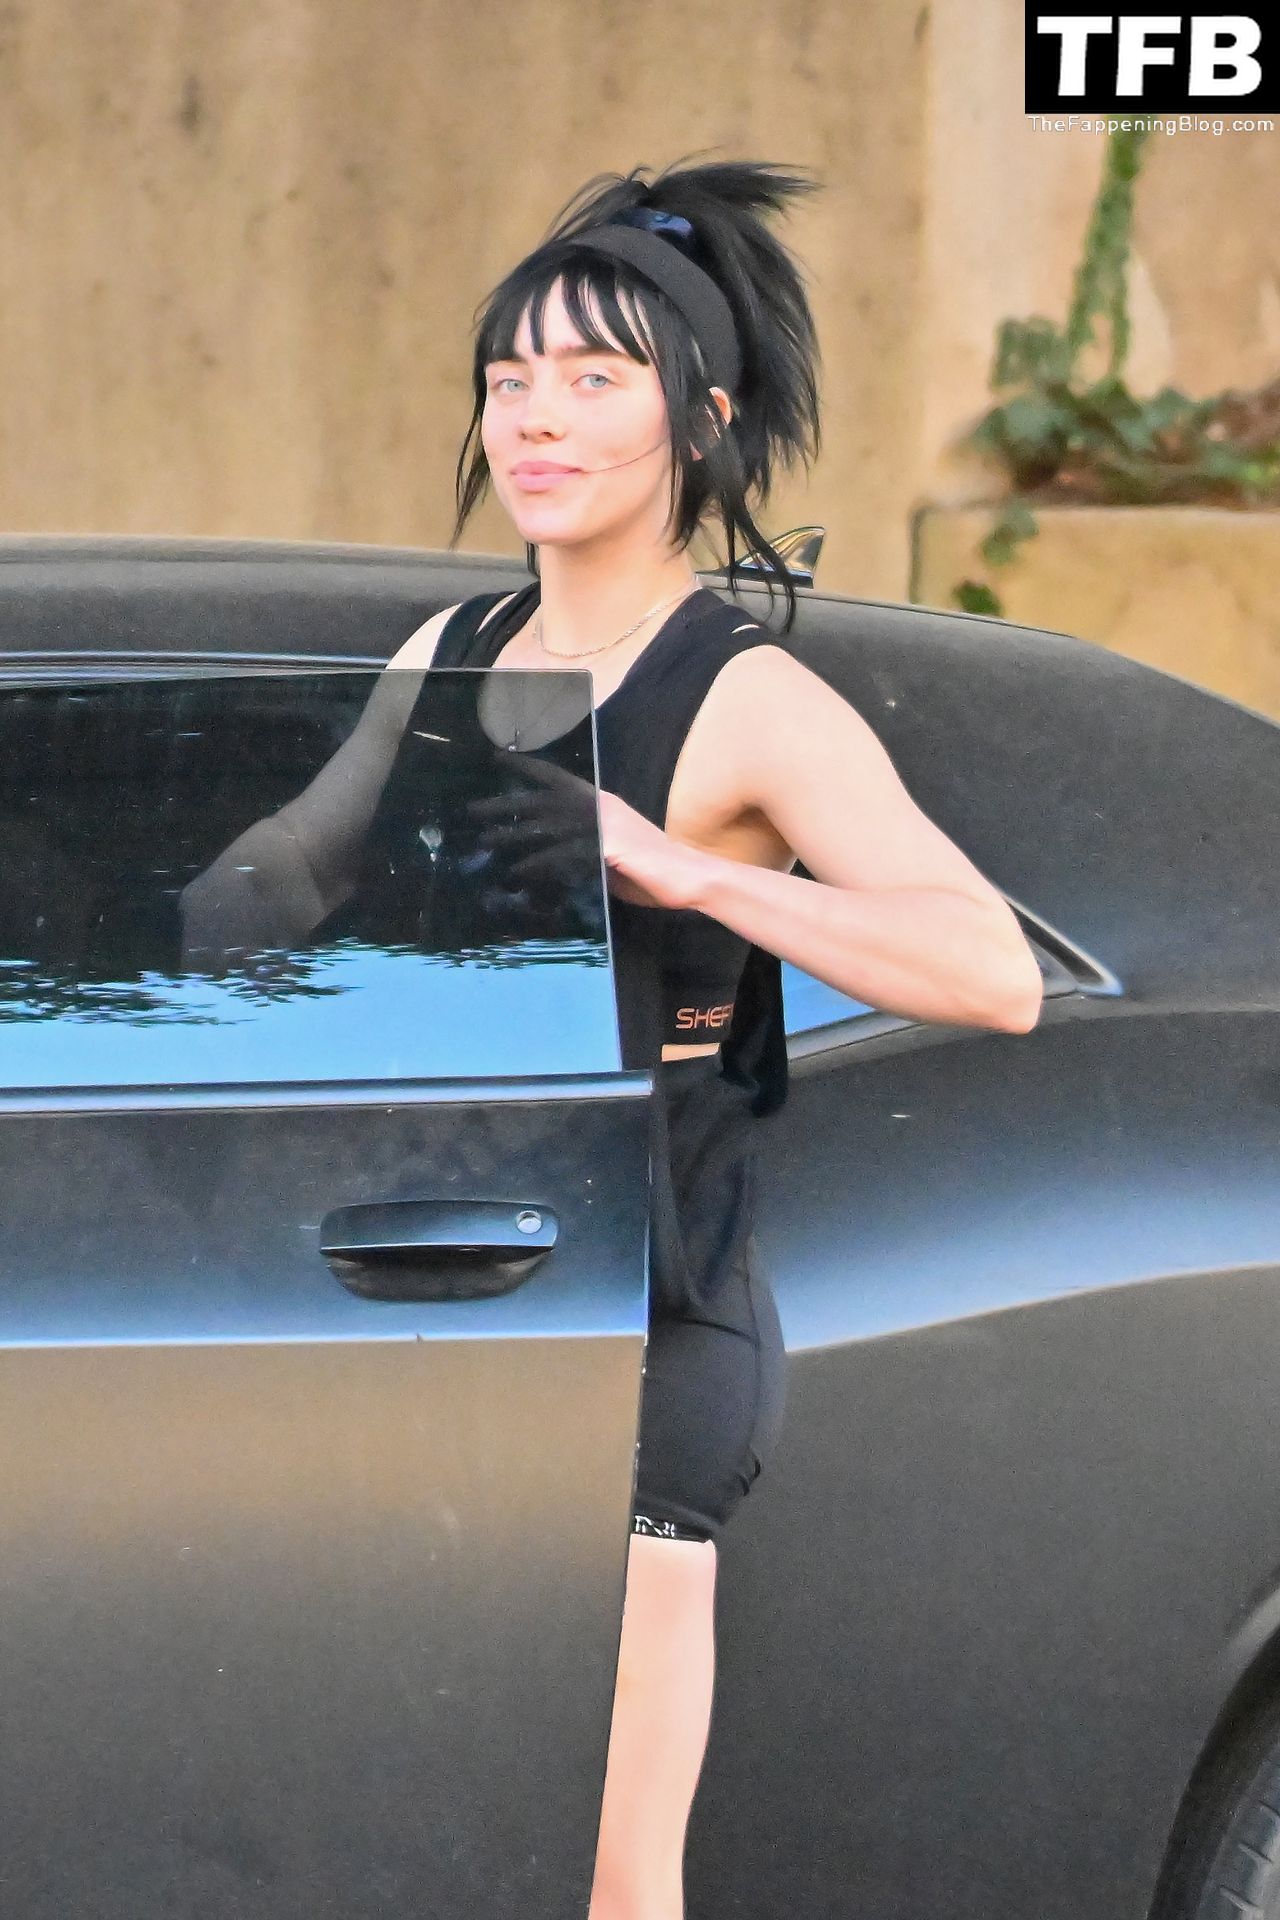 Billie Eilish Sexy The Fappening Blog 24 - Billie Eilish Keeps Up Her Fitness Regime, Stepping Out For Another Workout in Studio City (26 Photos)